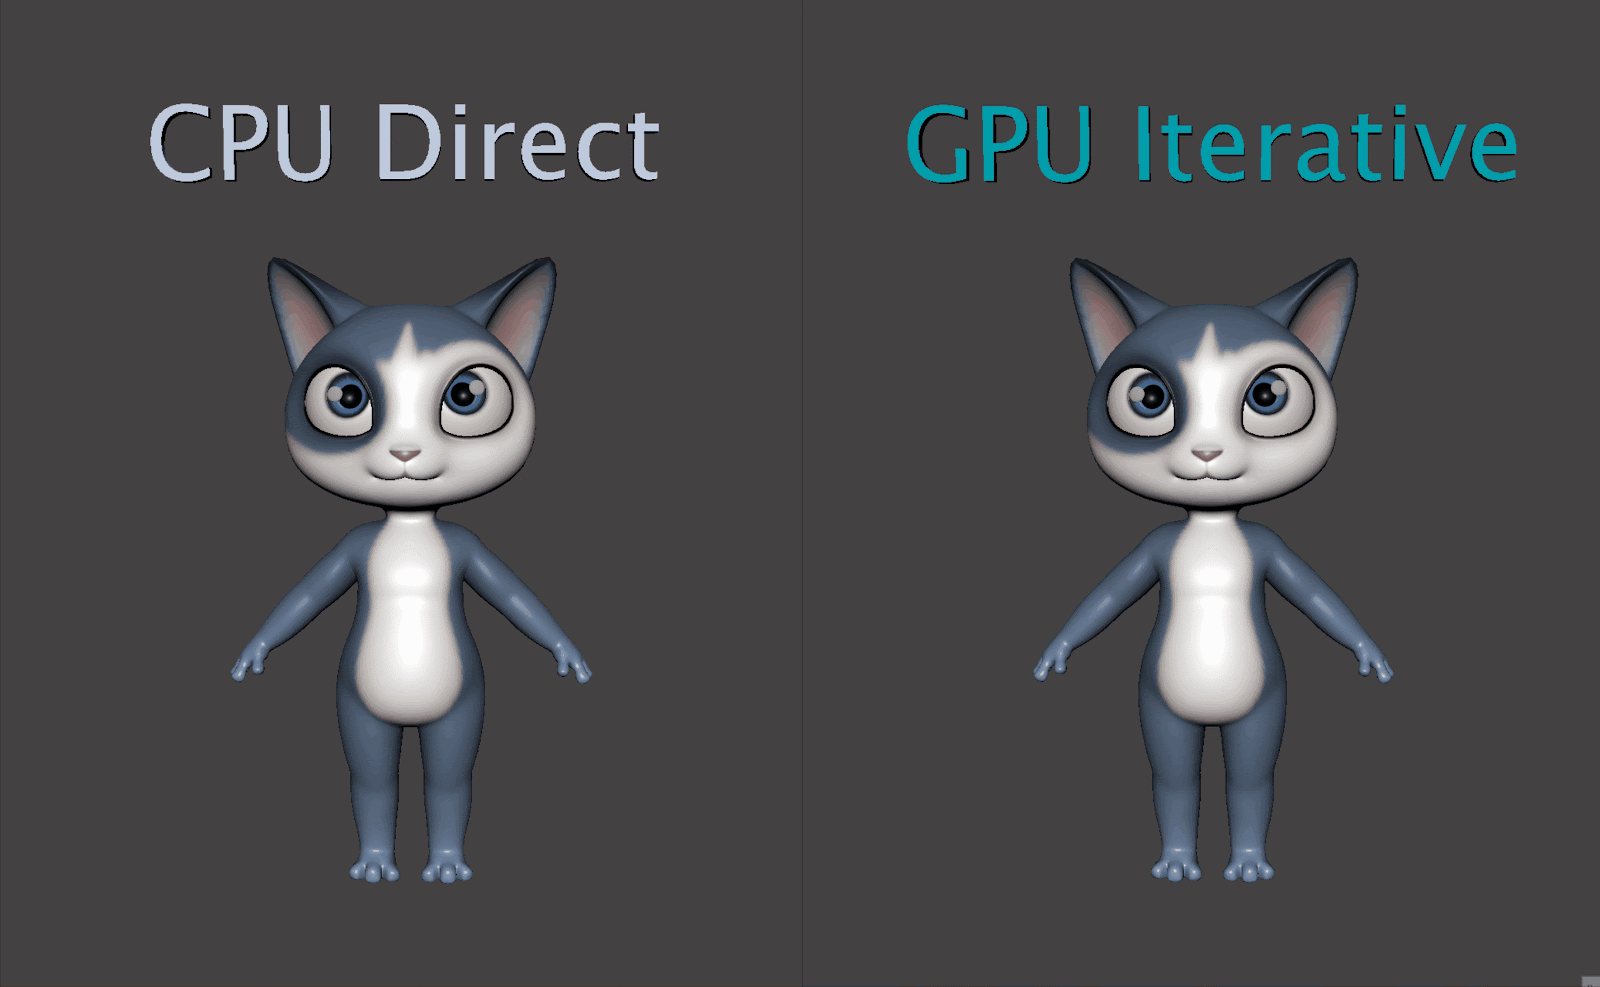 Ziva VFX 2.2’s new GPU Iterative solver simulation speed (on the right) as compared to the CPU Direct solver (on the left). For a stylized cat, the GPU solver runs about 2.3x faster, allowing for much quicker turnaround times. This simulation has been sped up 12x for demonstration.